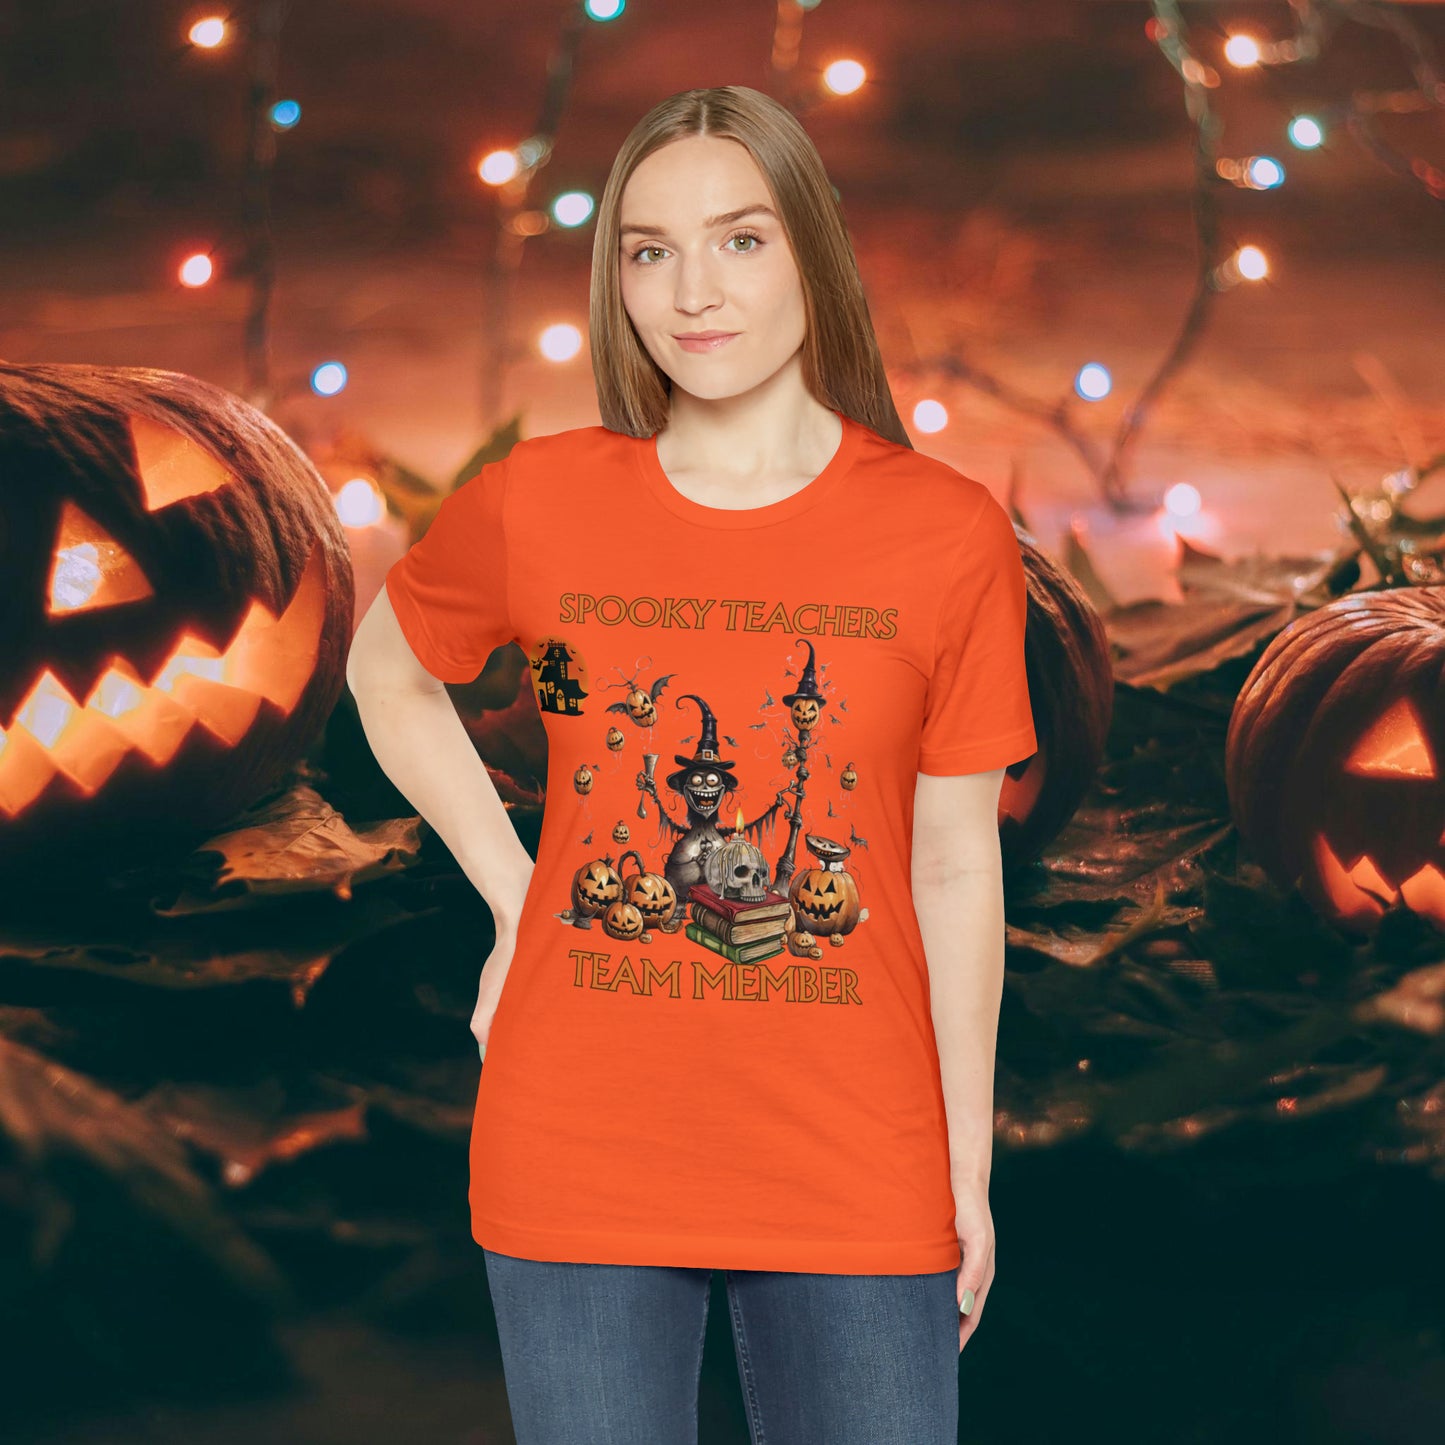 Spooky Teachers Team Member Unisex T-Shirt - Embrace Halloween Fun with this Hauntingly Stylish Tee for Educators T-Shirt   